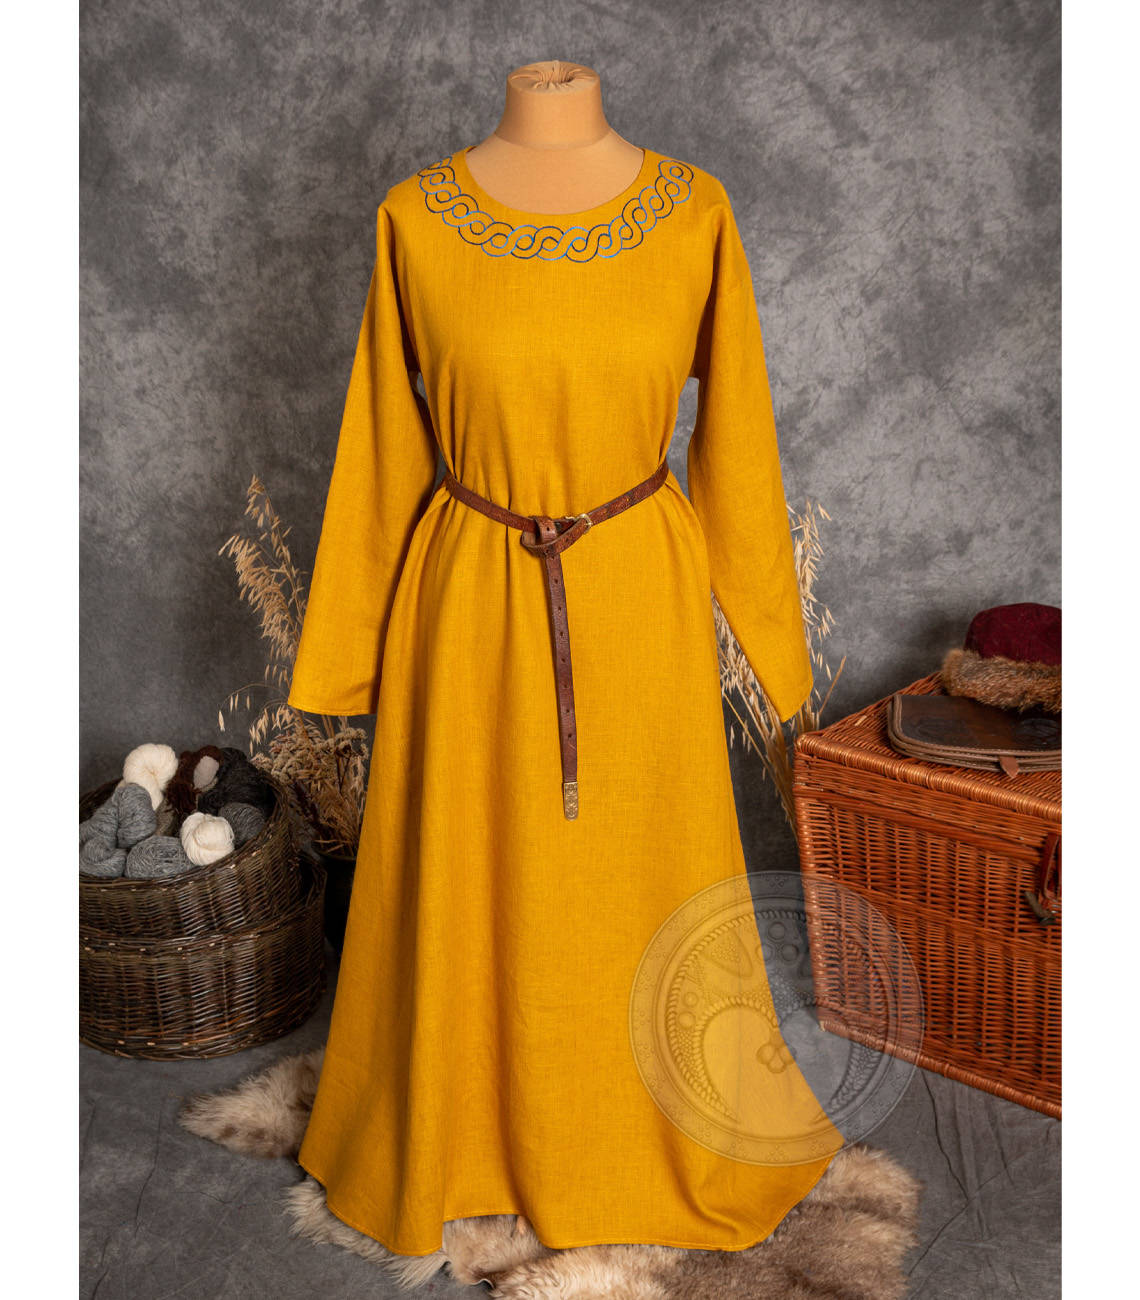 Late Medieval Underdress